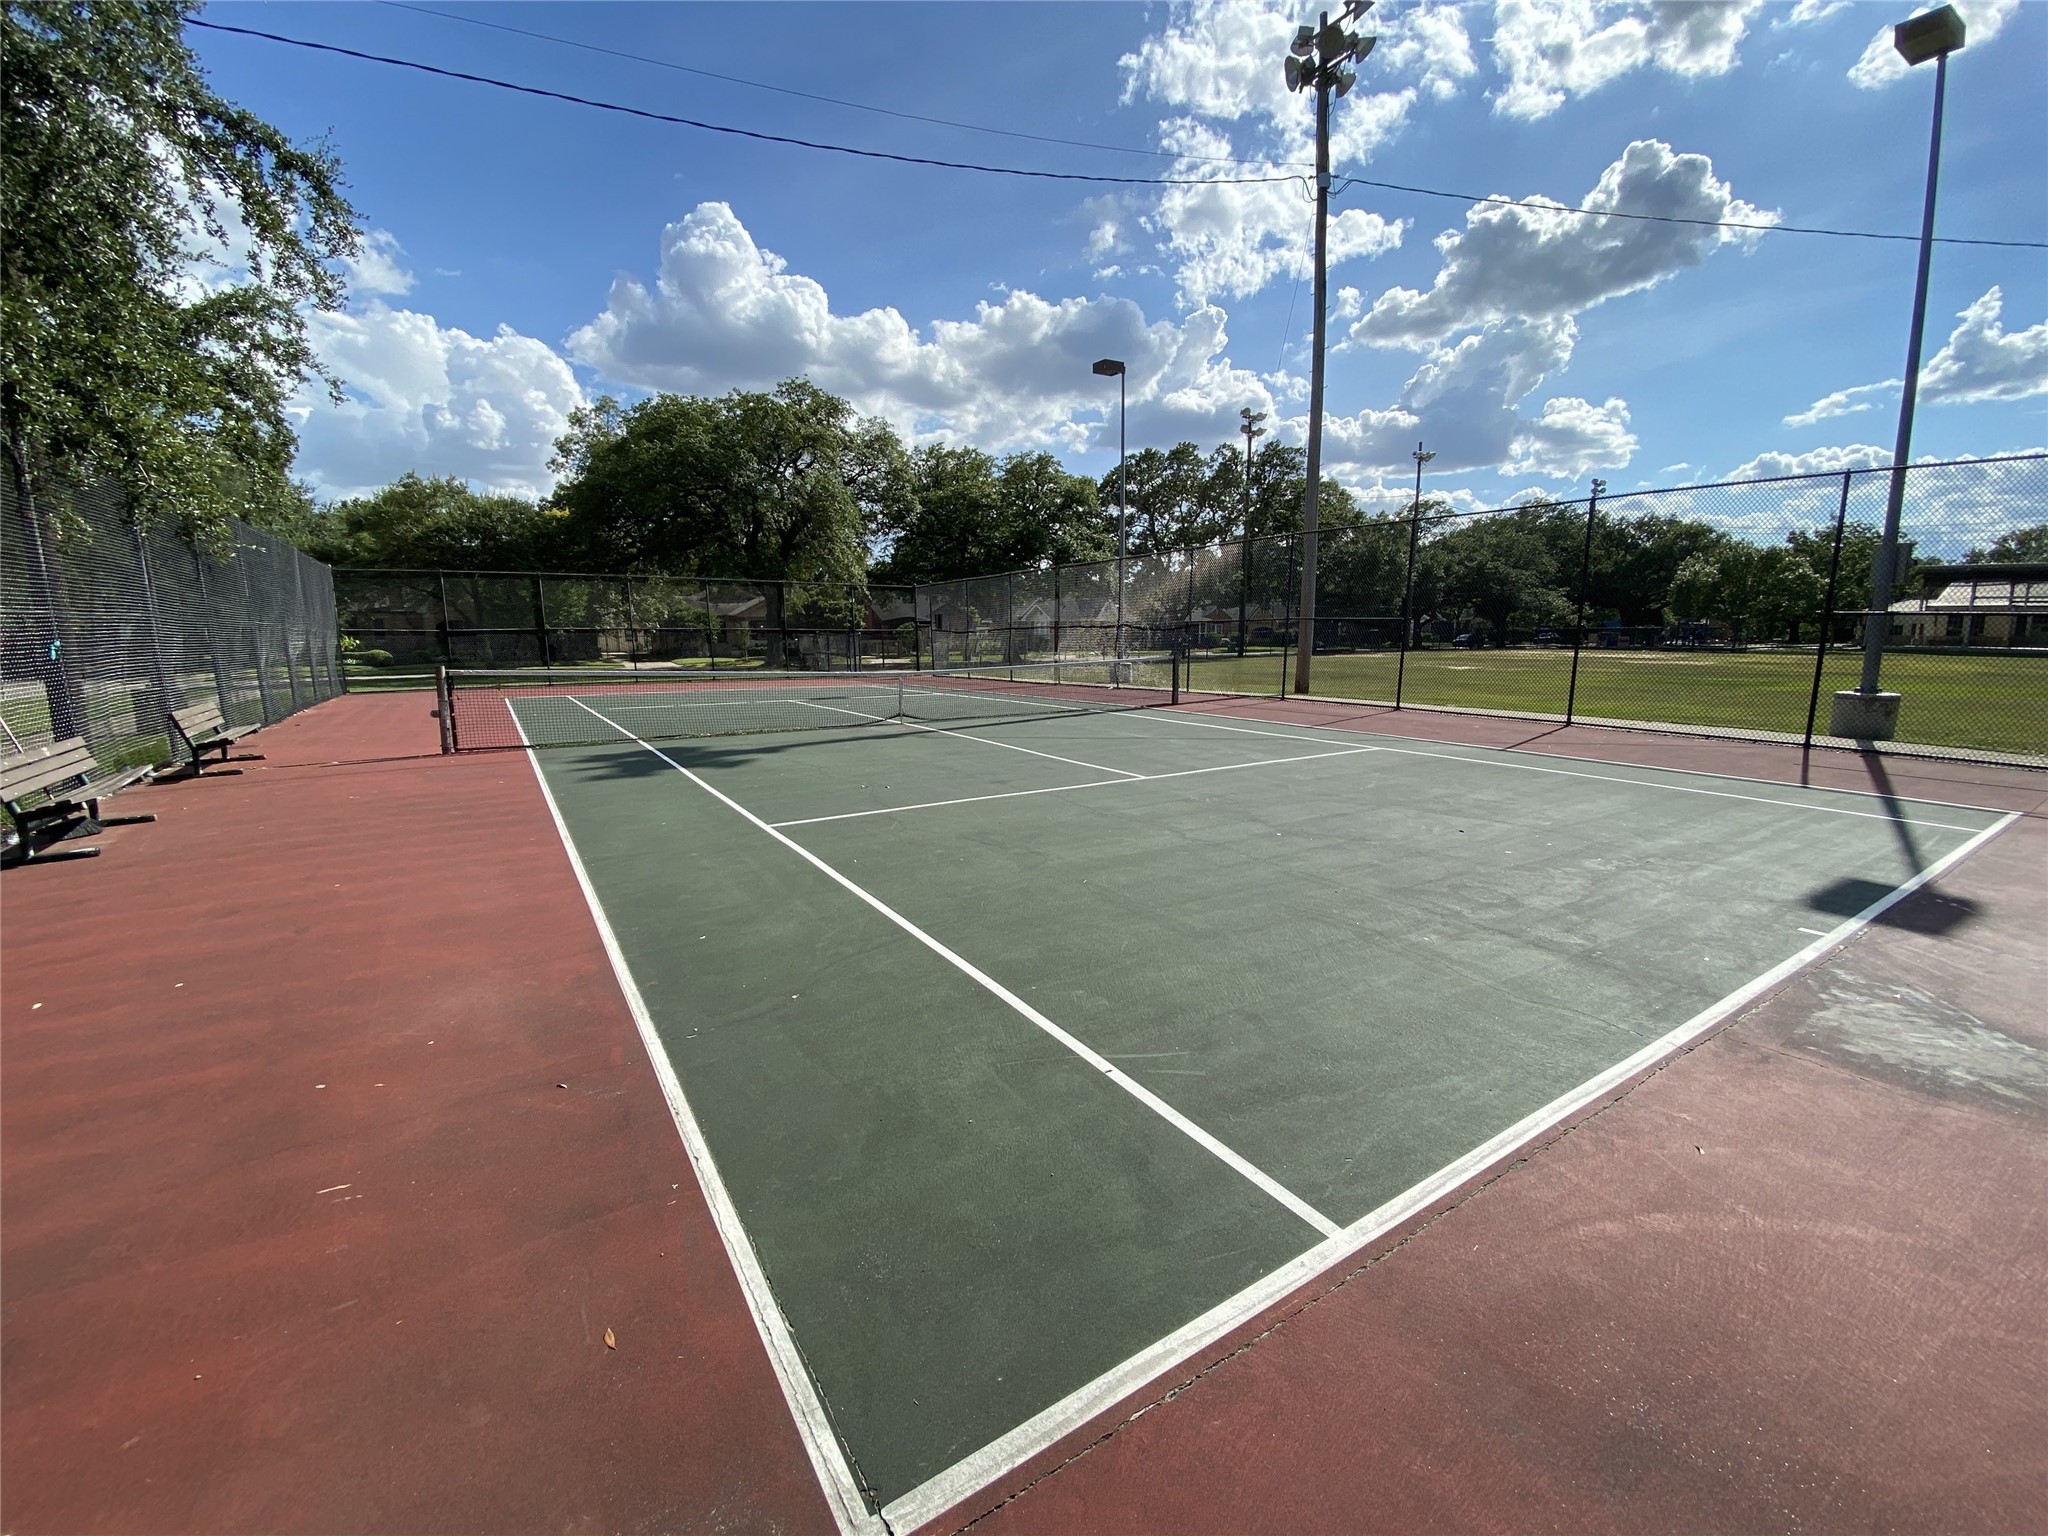 Located just a couple blocks away from Proctor Park, which includes a great tennis court, tons of green space, and a playground.